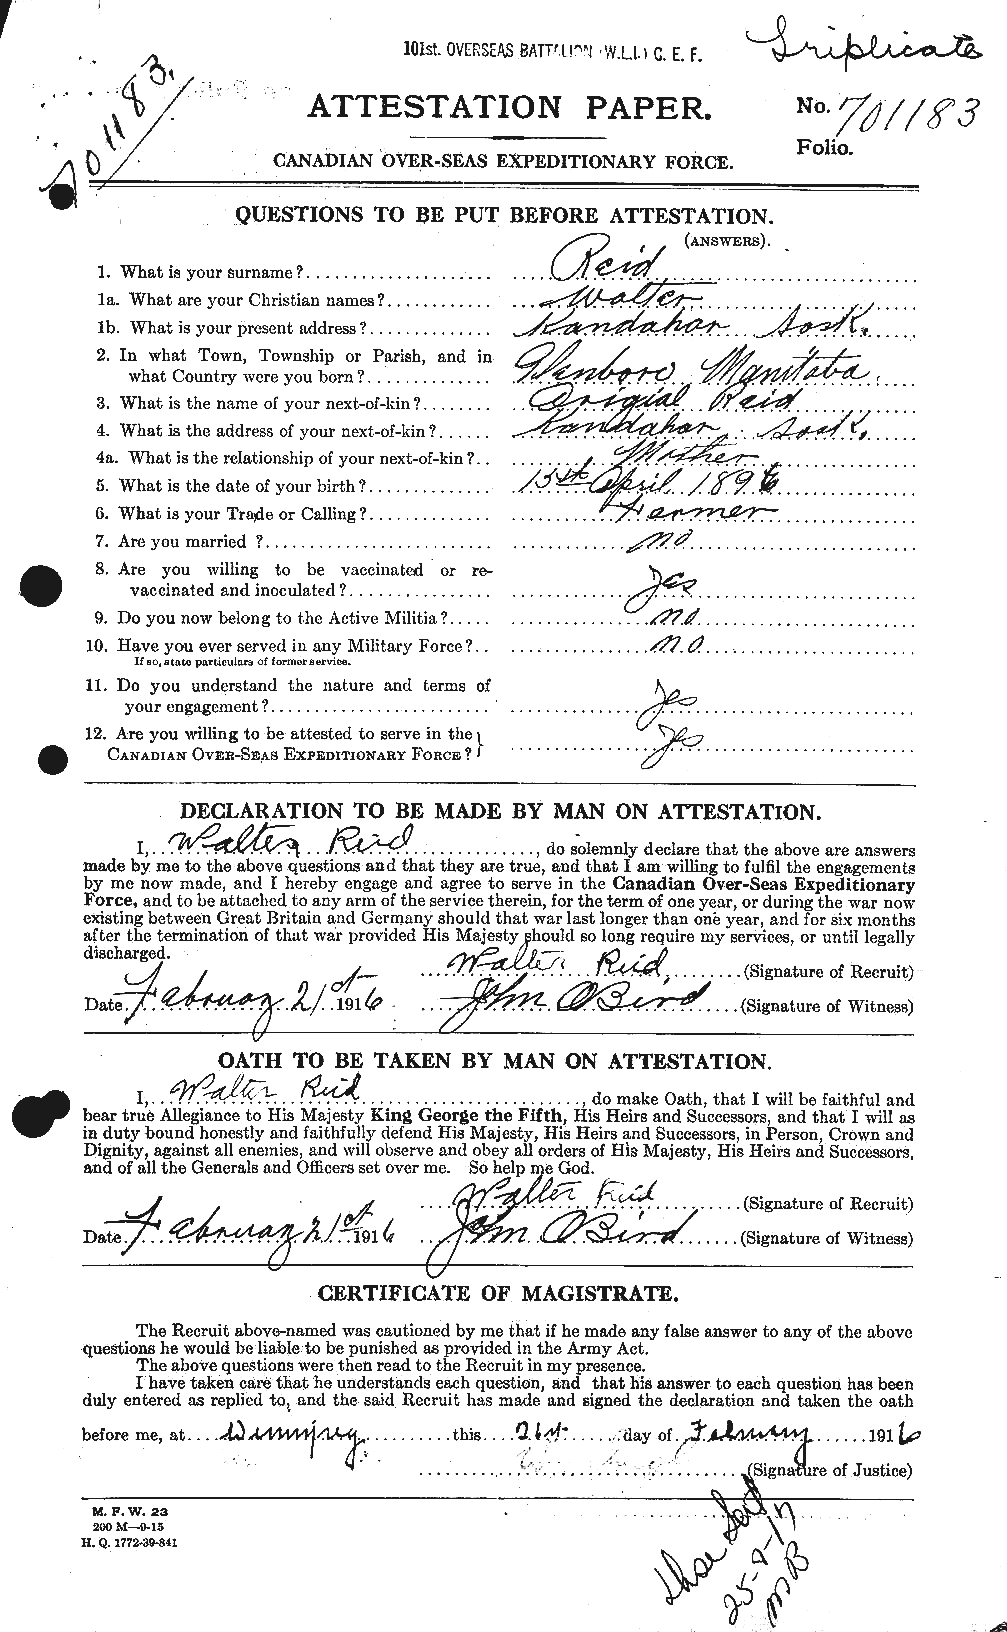 Personnel Records of the First World War - CEF 596885a